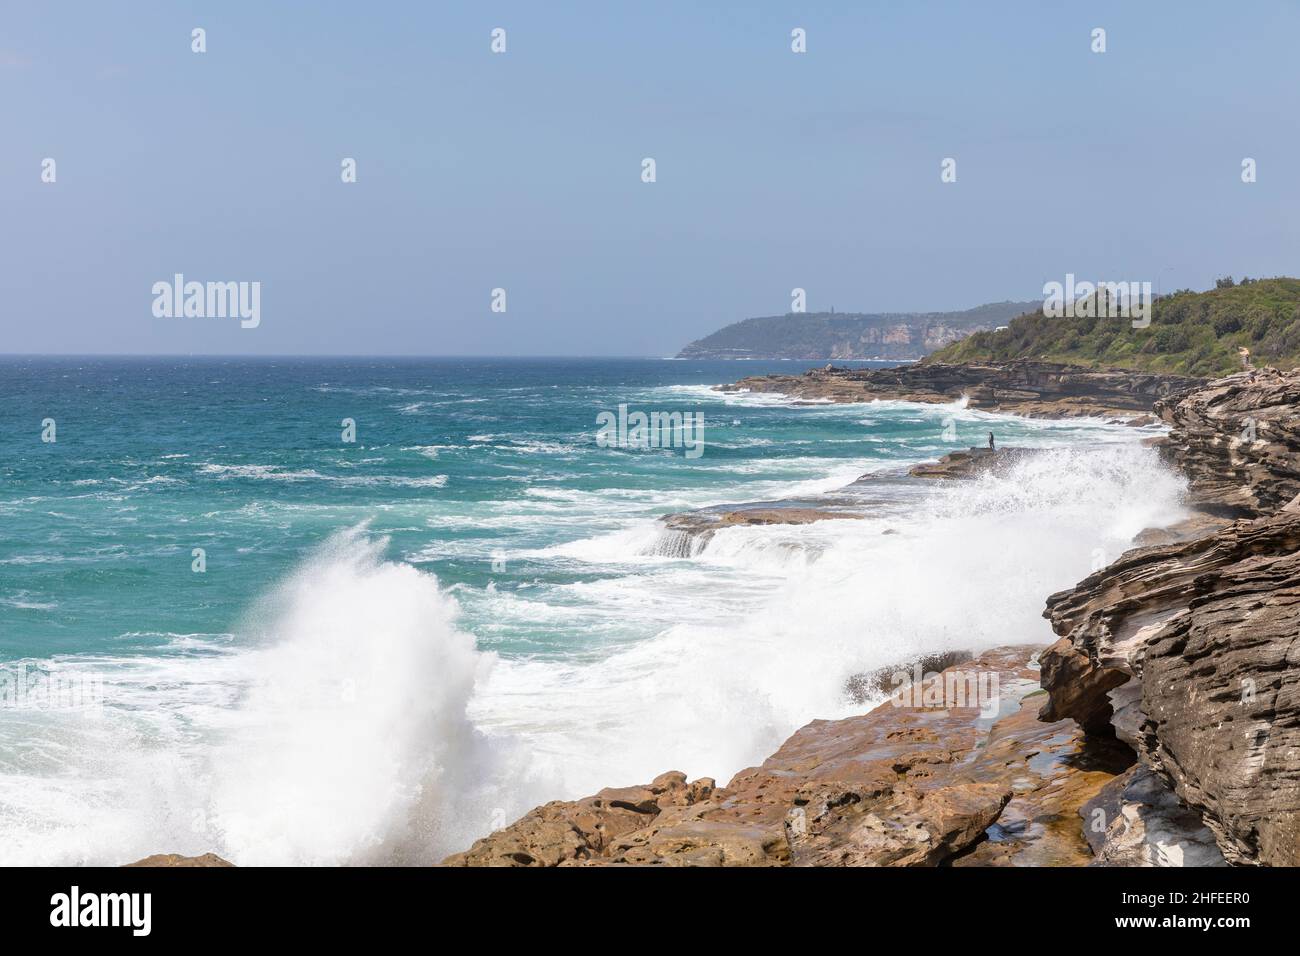 Curl Curl boardwalk renamed Harry Eliffe Way between Curl Curl and Freshwater Sydney gives dramatic coastal views, tsunami warning issued today jan 22 Stock Photo